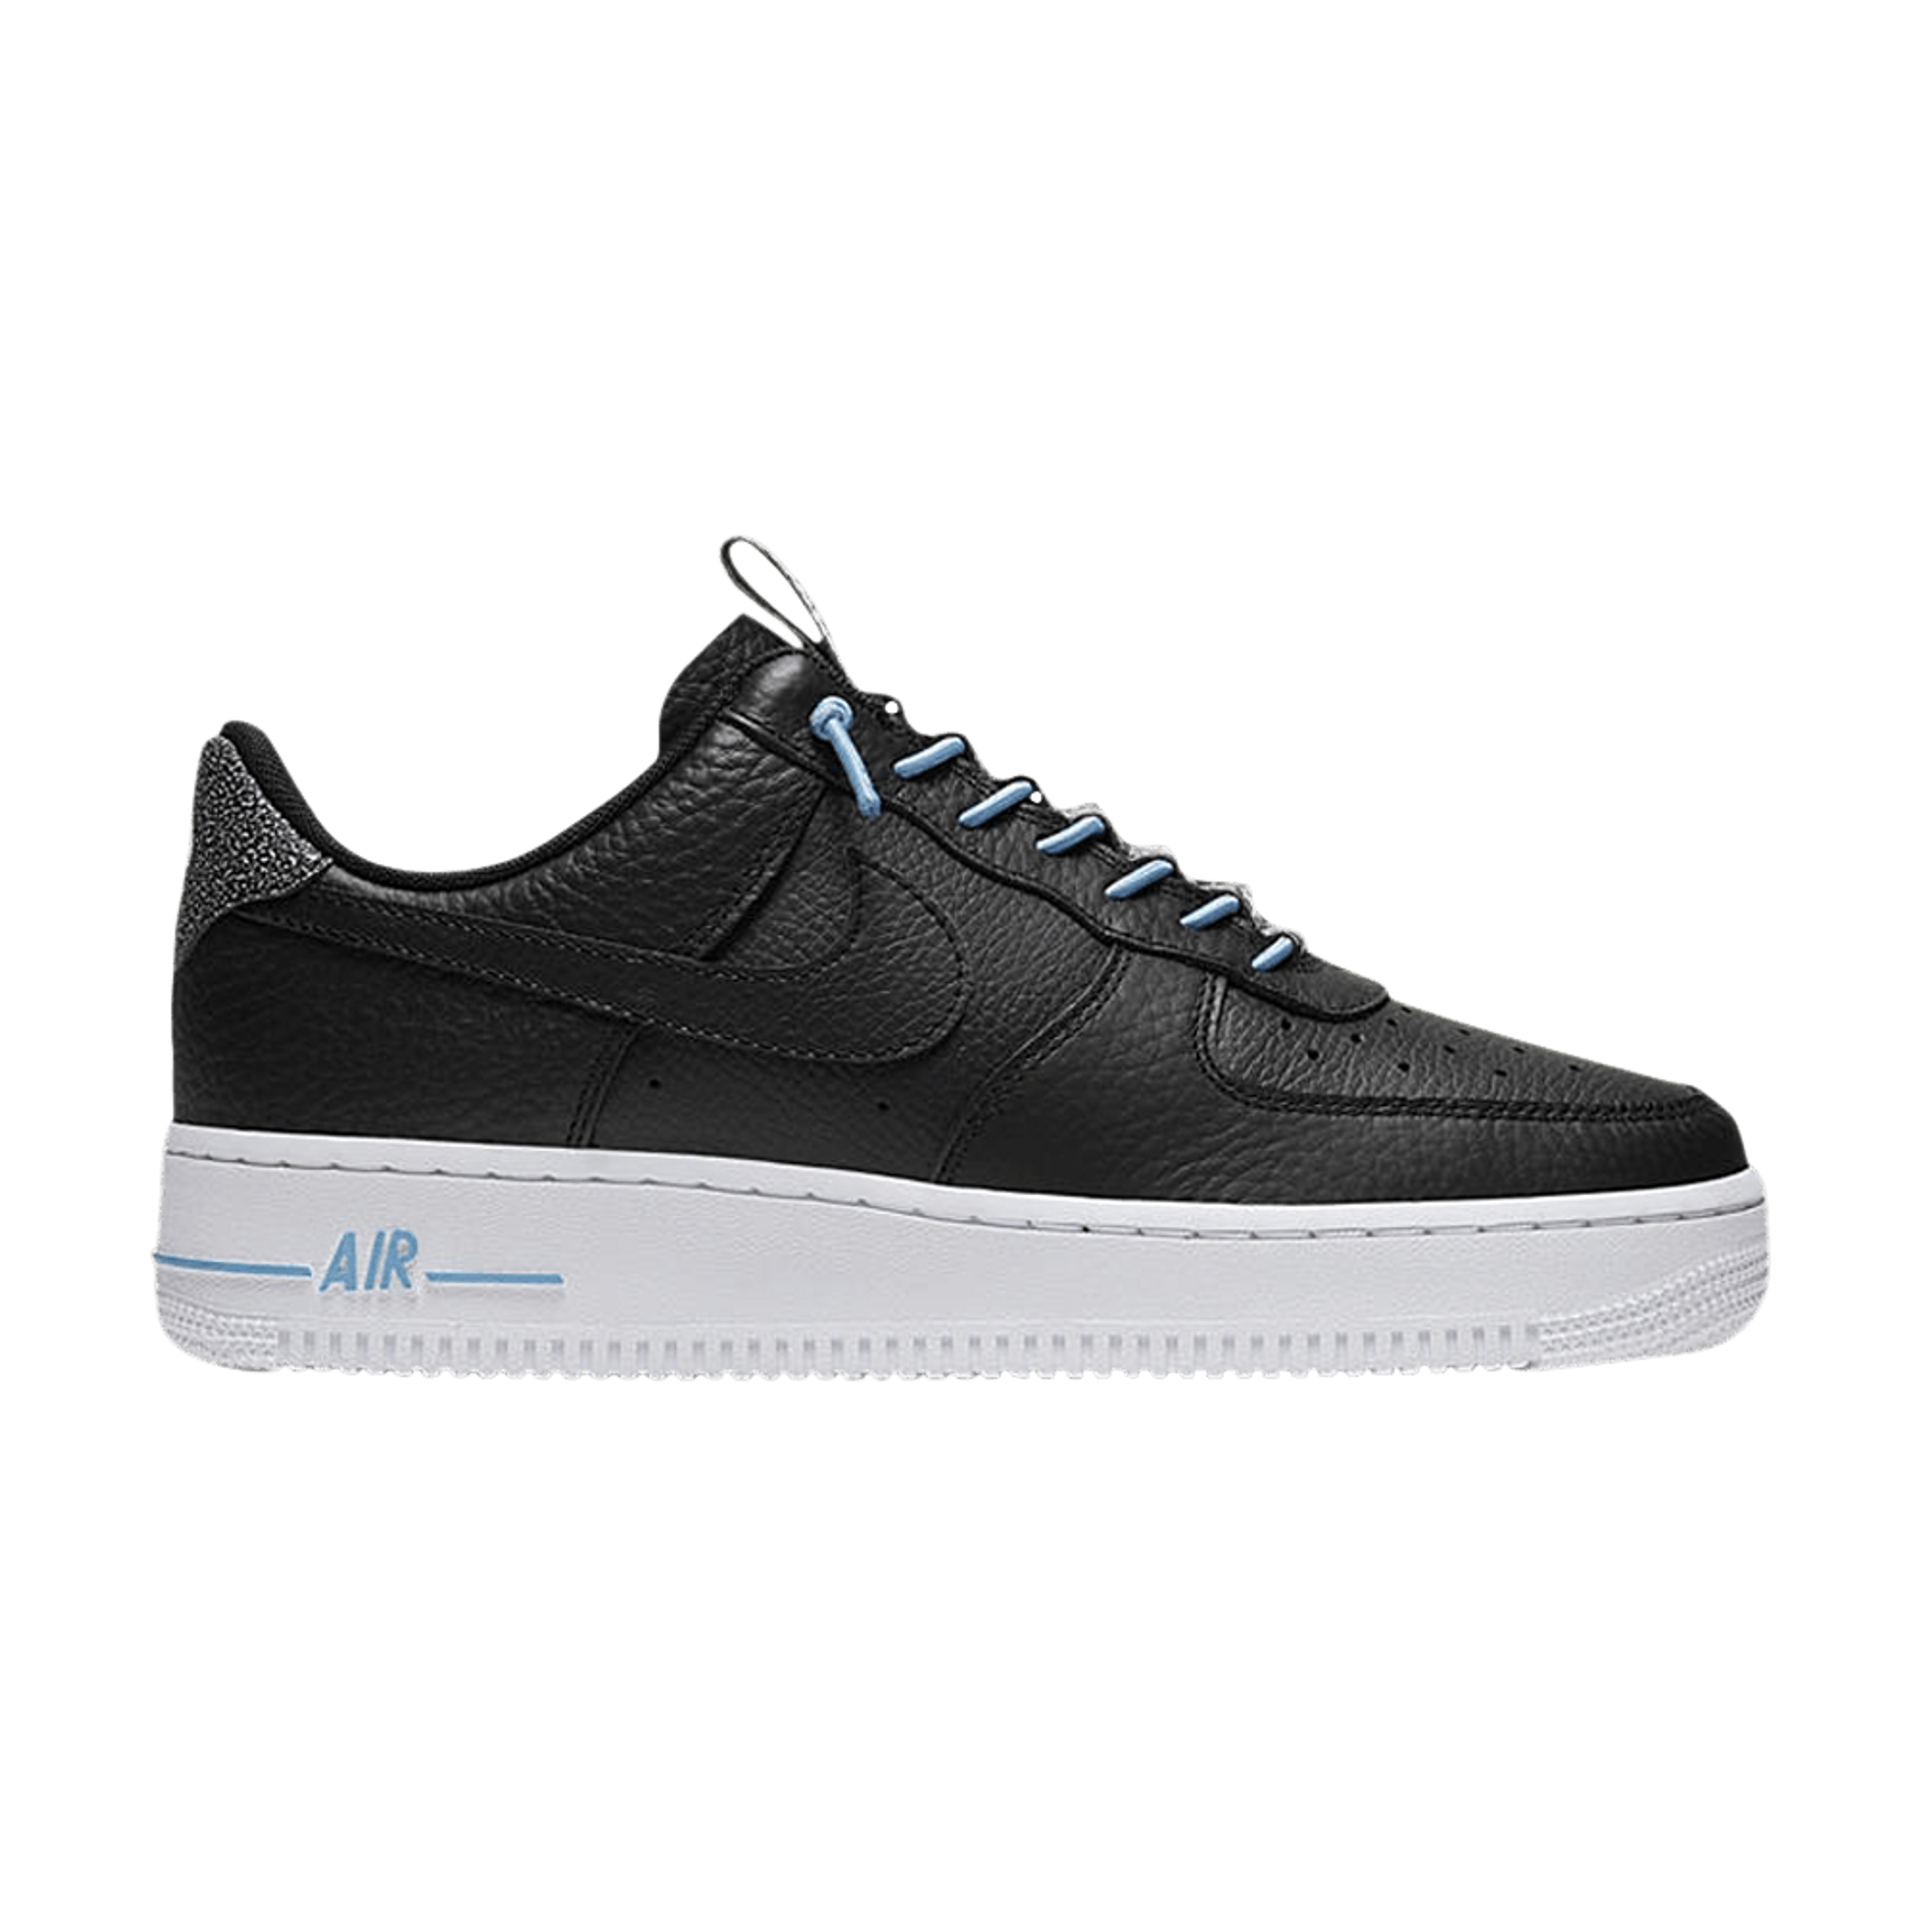 Nike Wmns Air Force 1 '07 Low 'Black Reflective' - 898889 015 | Ox Street